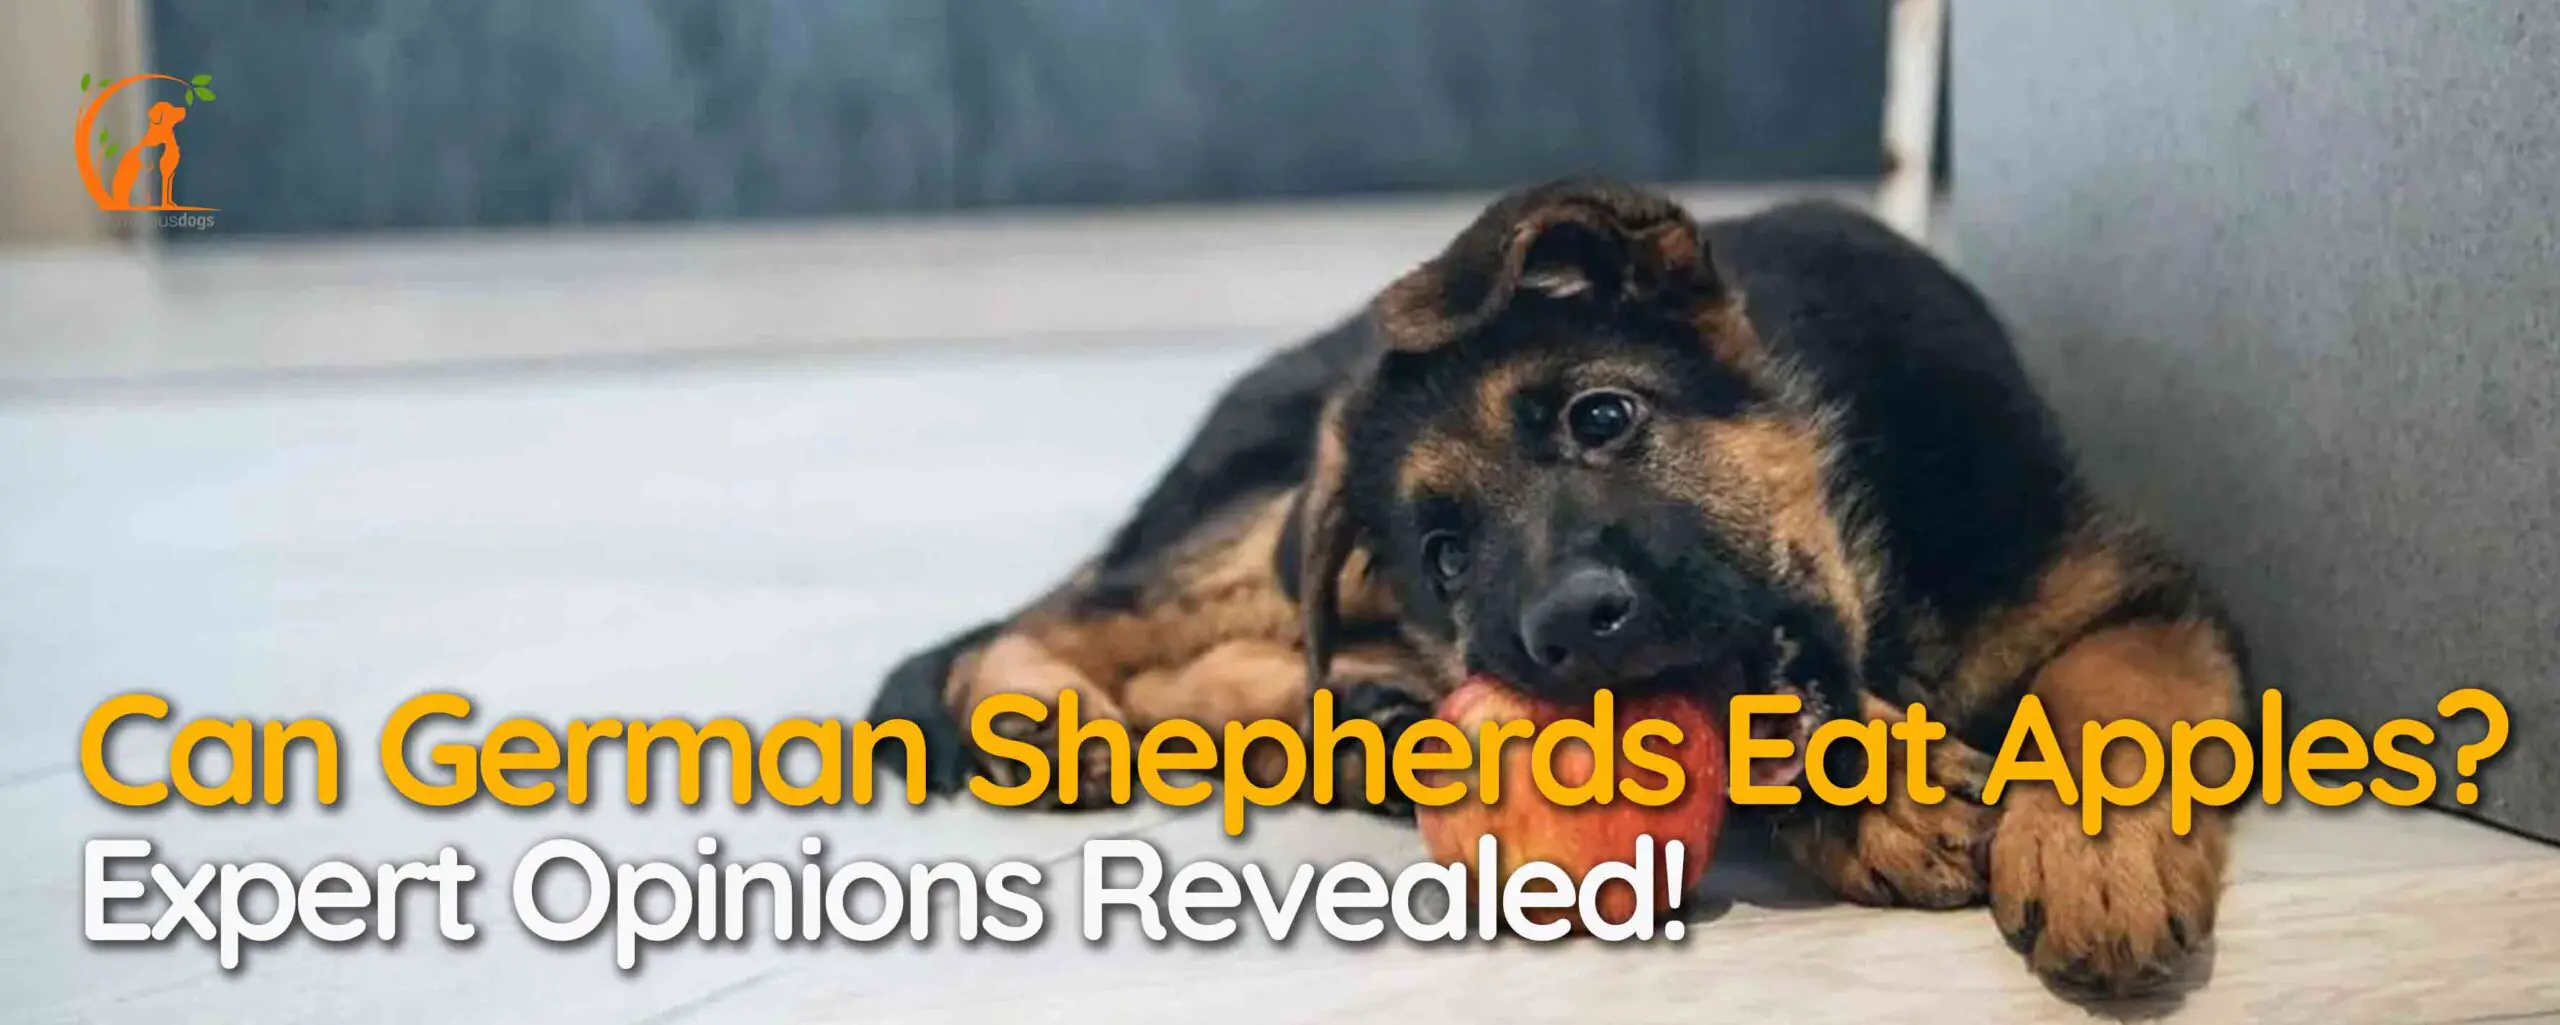 Can German Shepherds Eat Apples? Expert Opinions Revealed!